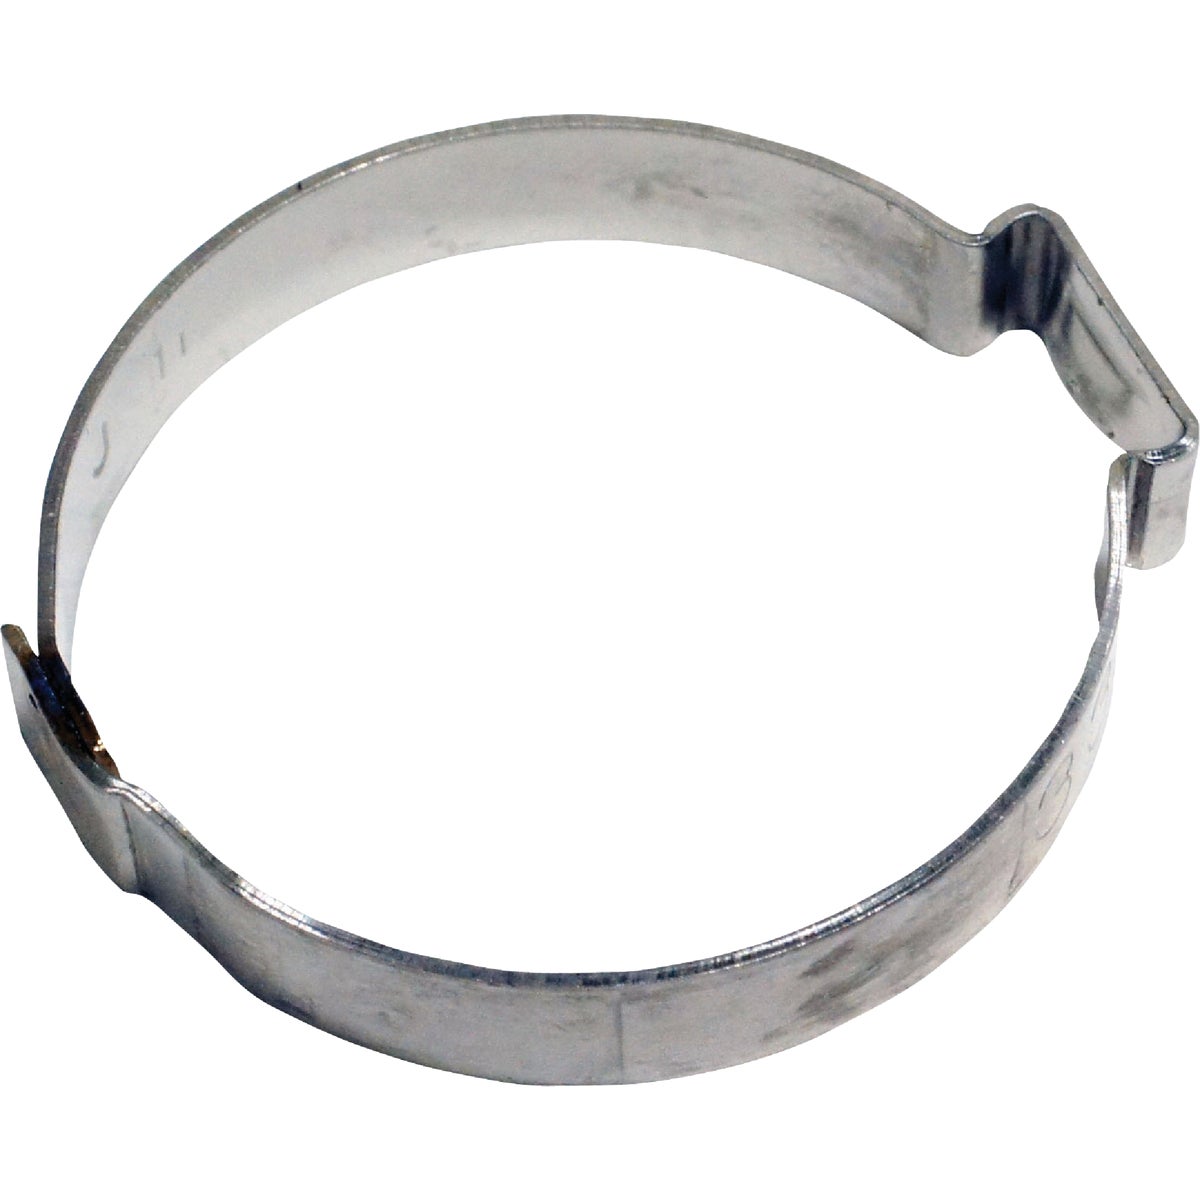 Item 404371, 1 1/4" Stainless steel pinch clamps for use securing plastic or steel 